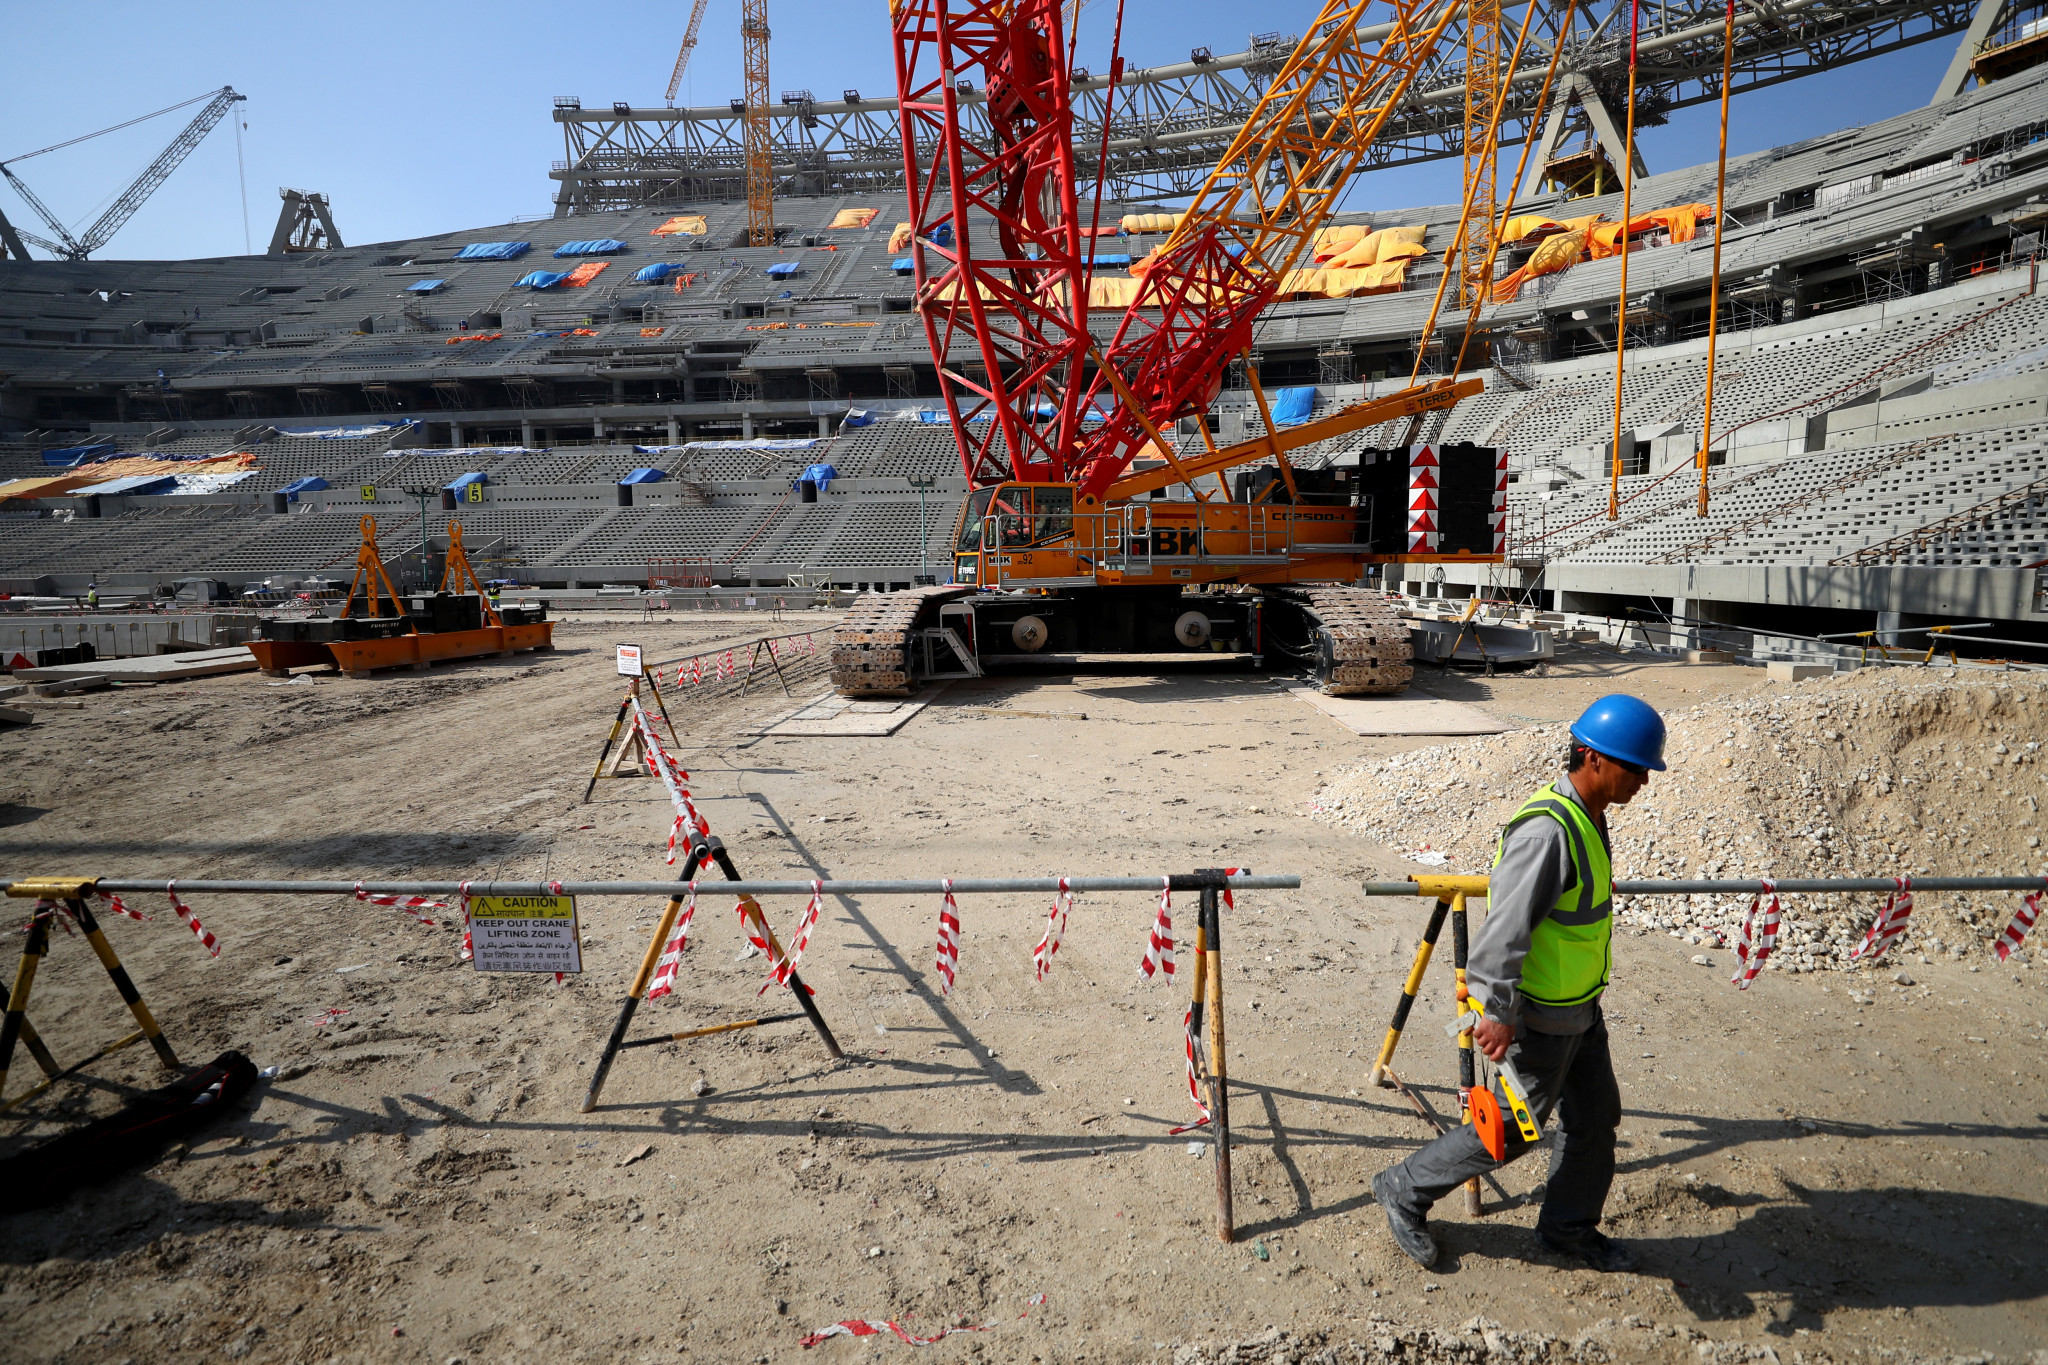 Concerns over human rights abuses have dominated the build-up to the 2022 FIFA World Cup ©Getty Images